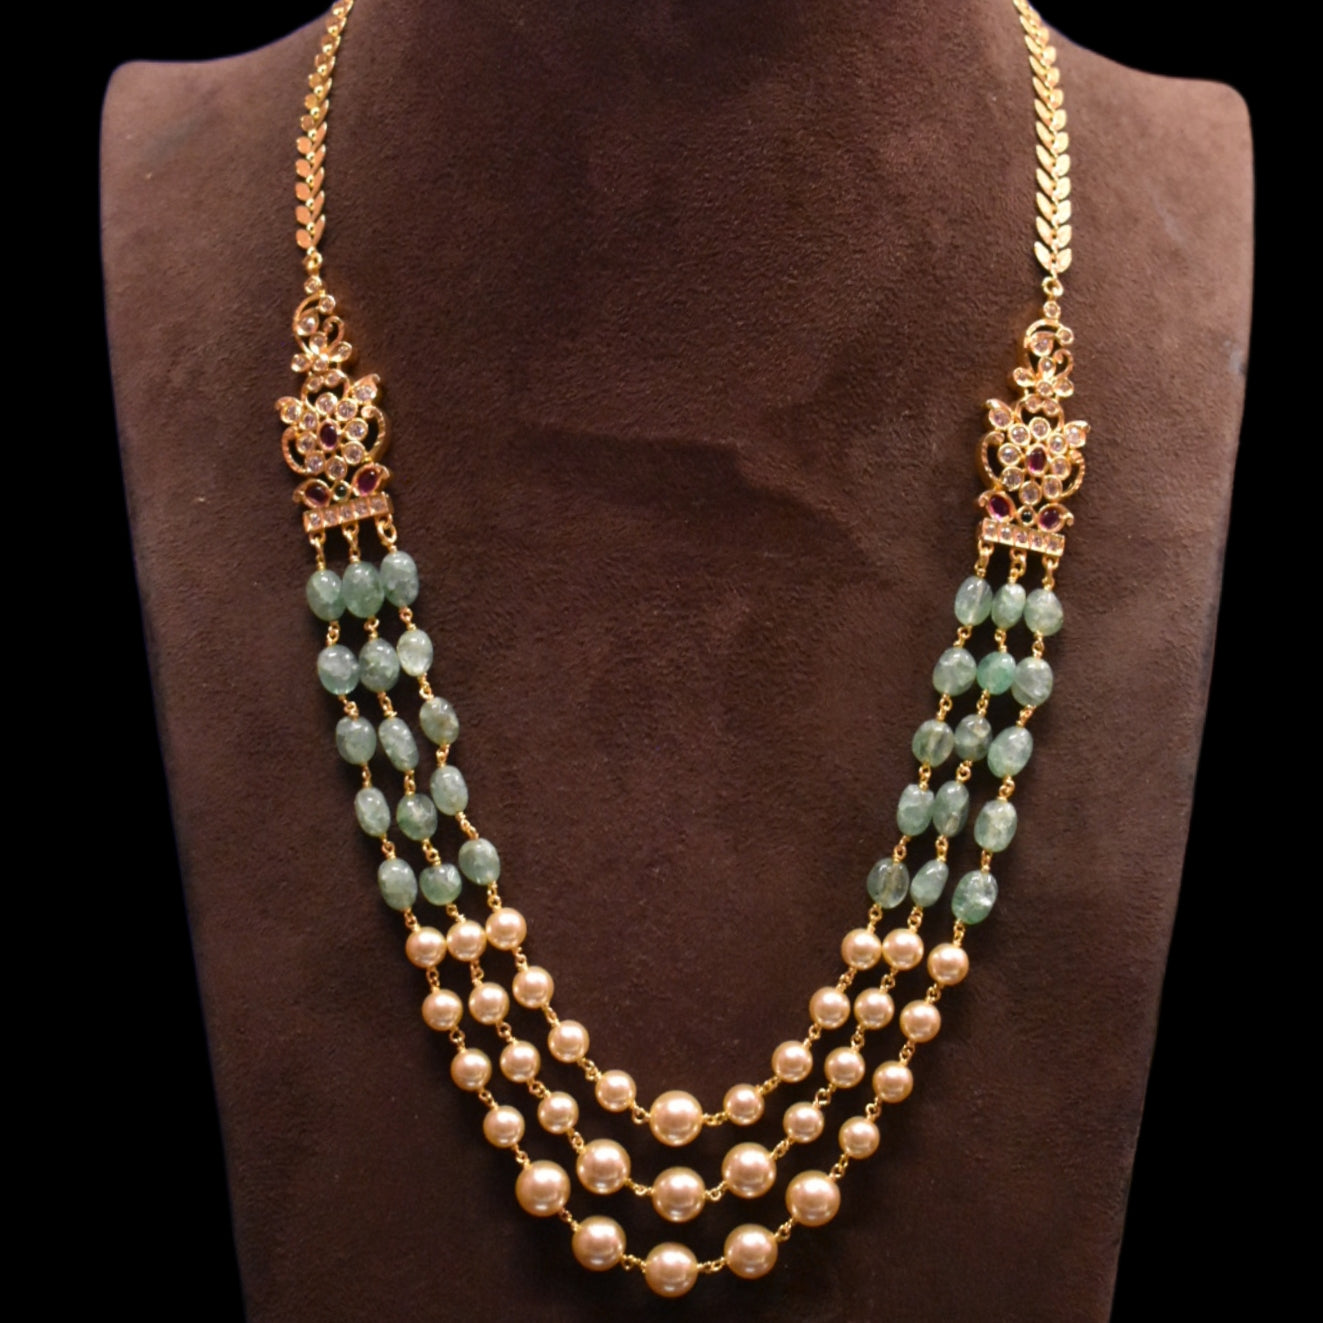 "Dazzle in Style: Three-Layered Pearls & Emerald Chain with Chic Side Brooches"